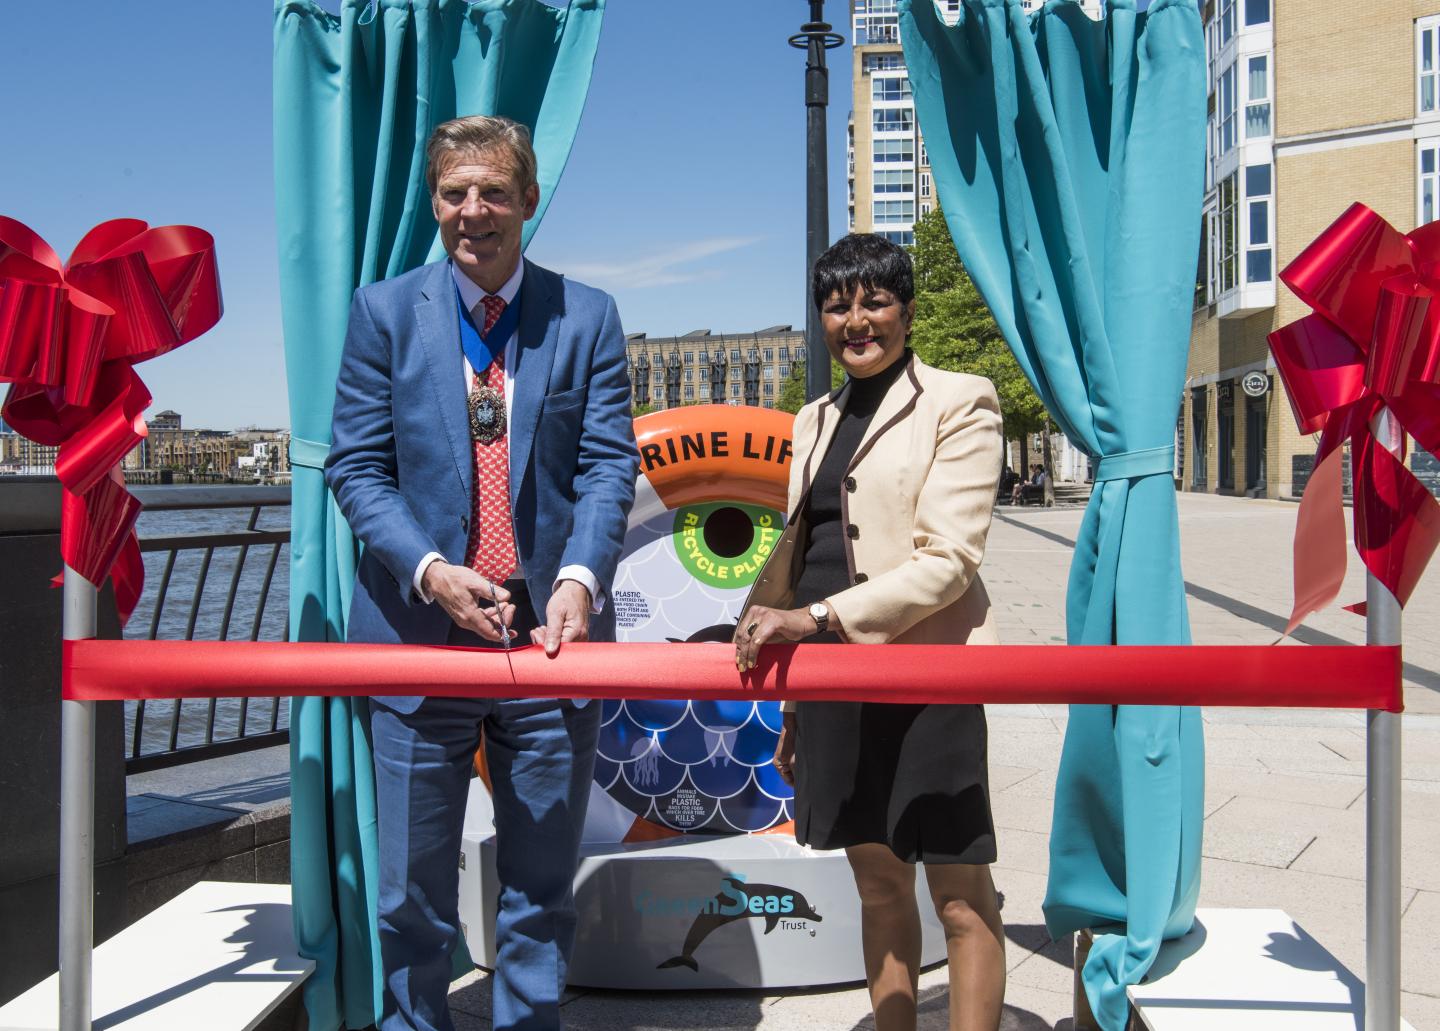 A man and a woman cut a ribbon tape to mark the installation of a new orange recycling bin on a seaside promenade